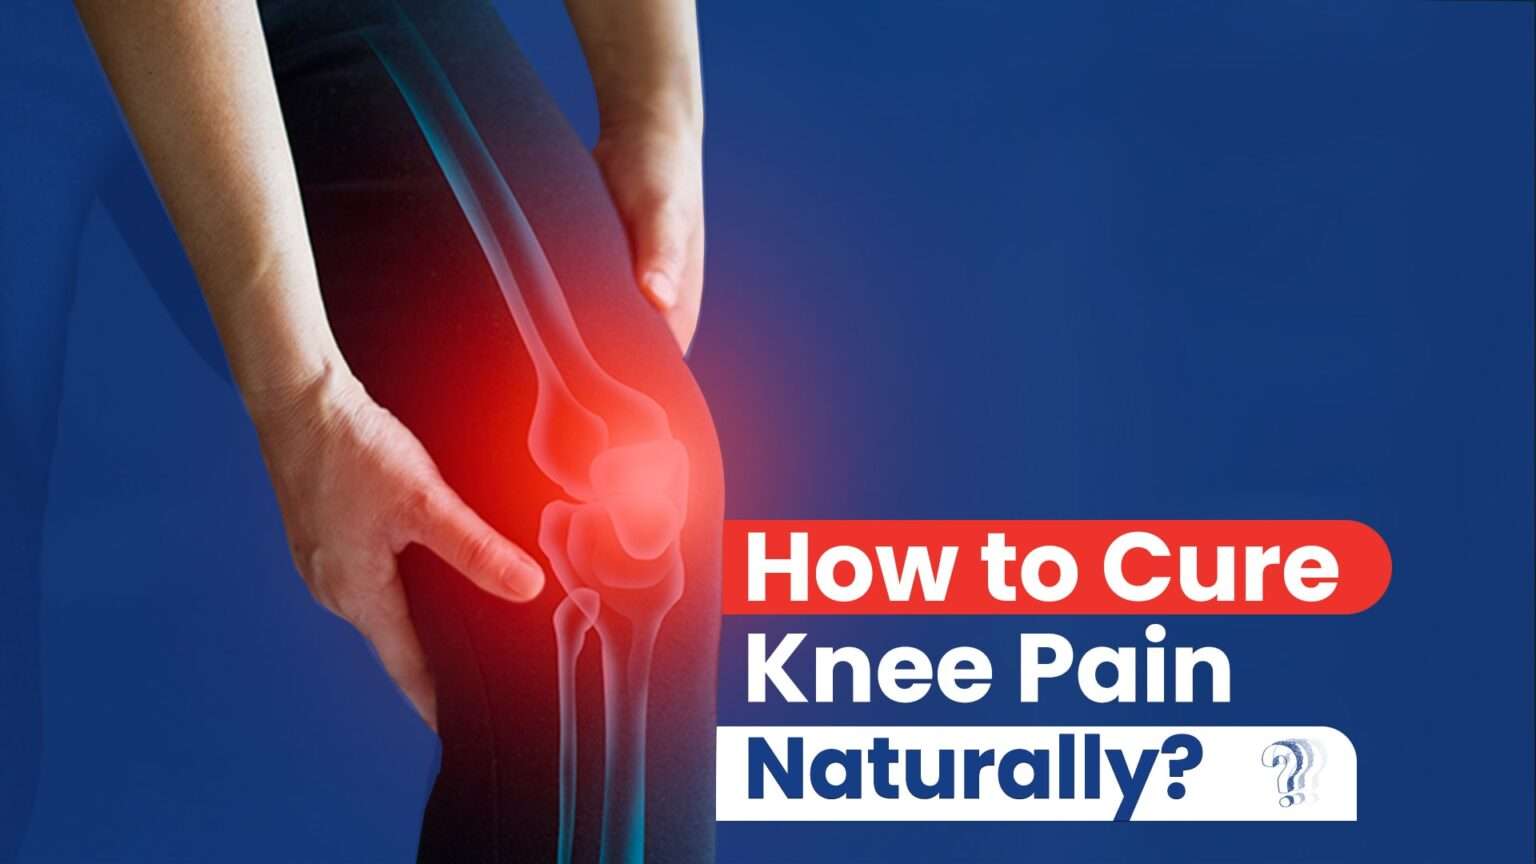 How To Cure Knee Pain Naturally